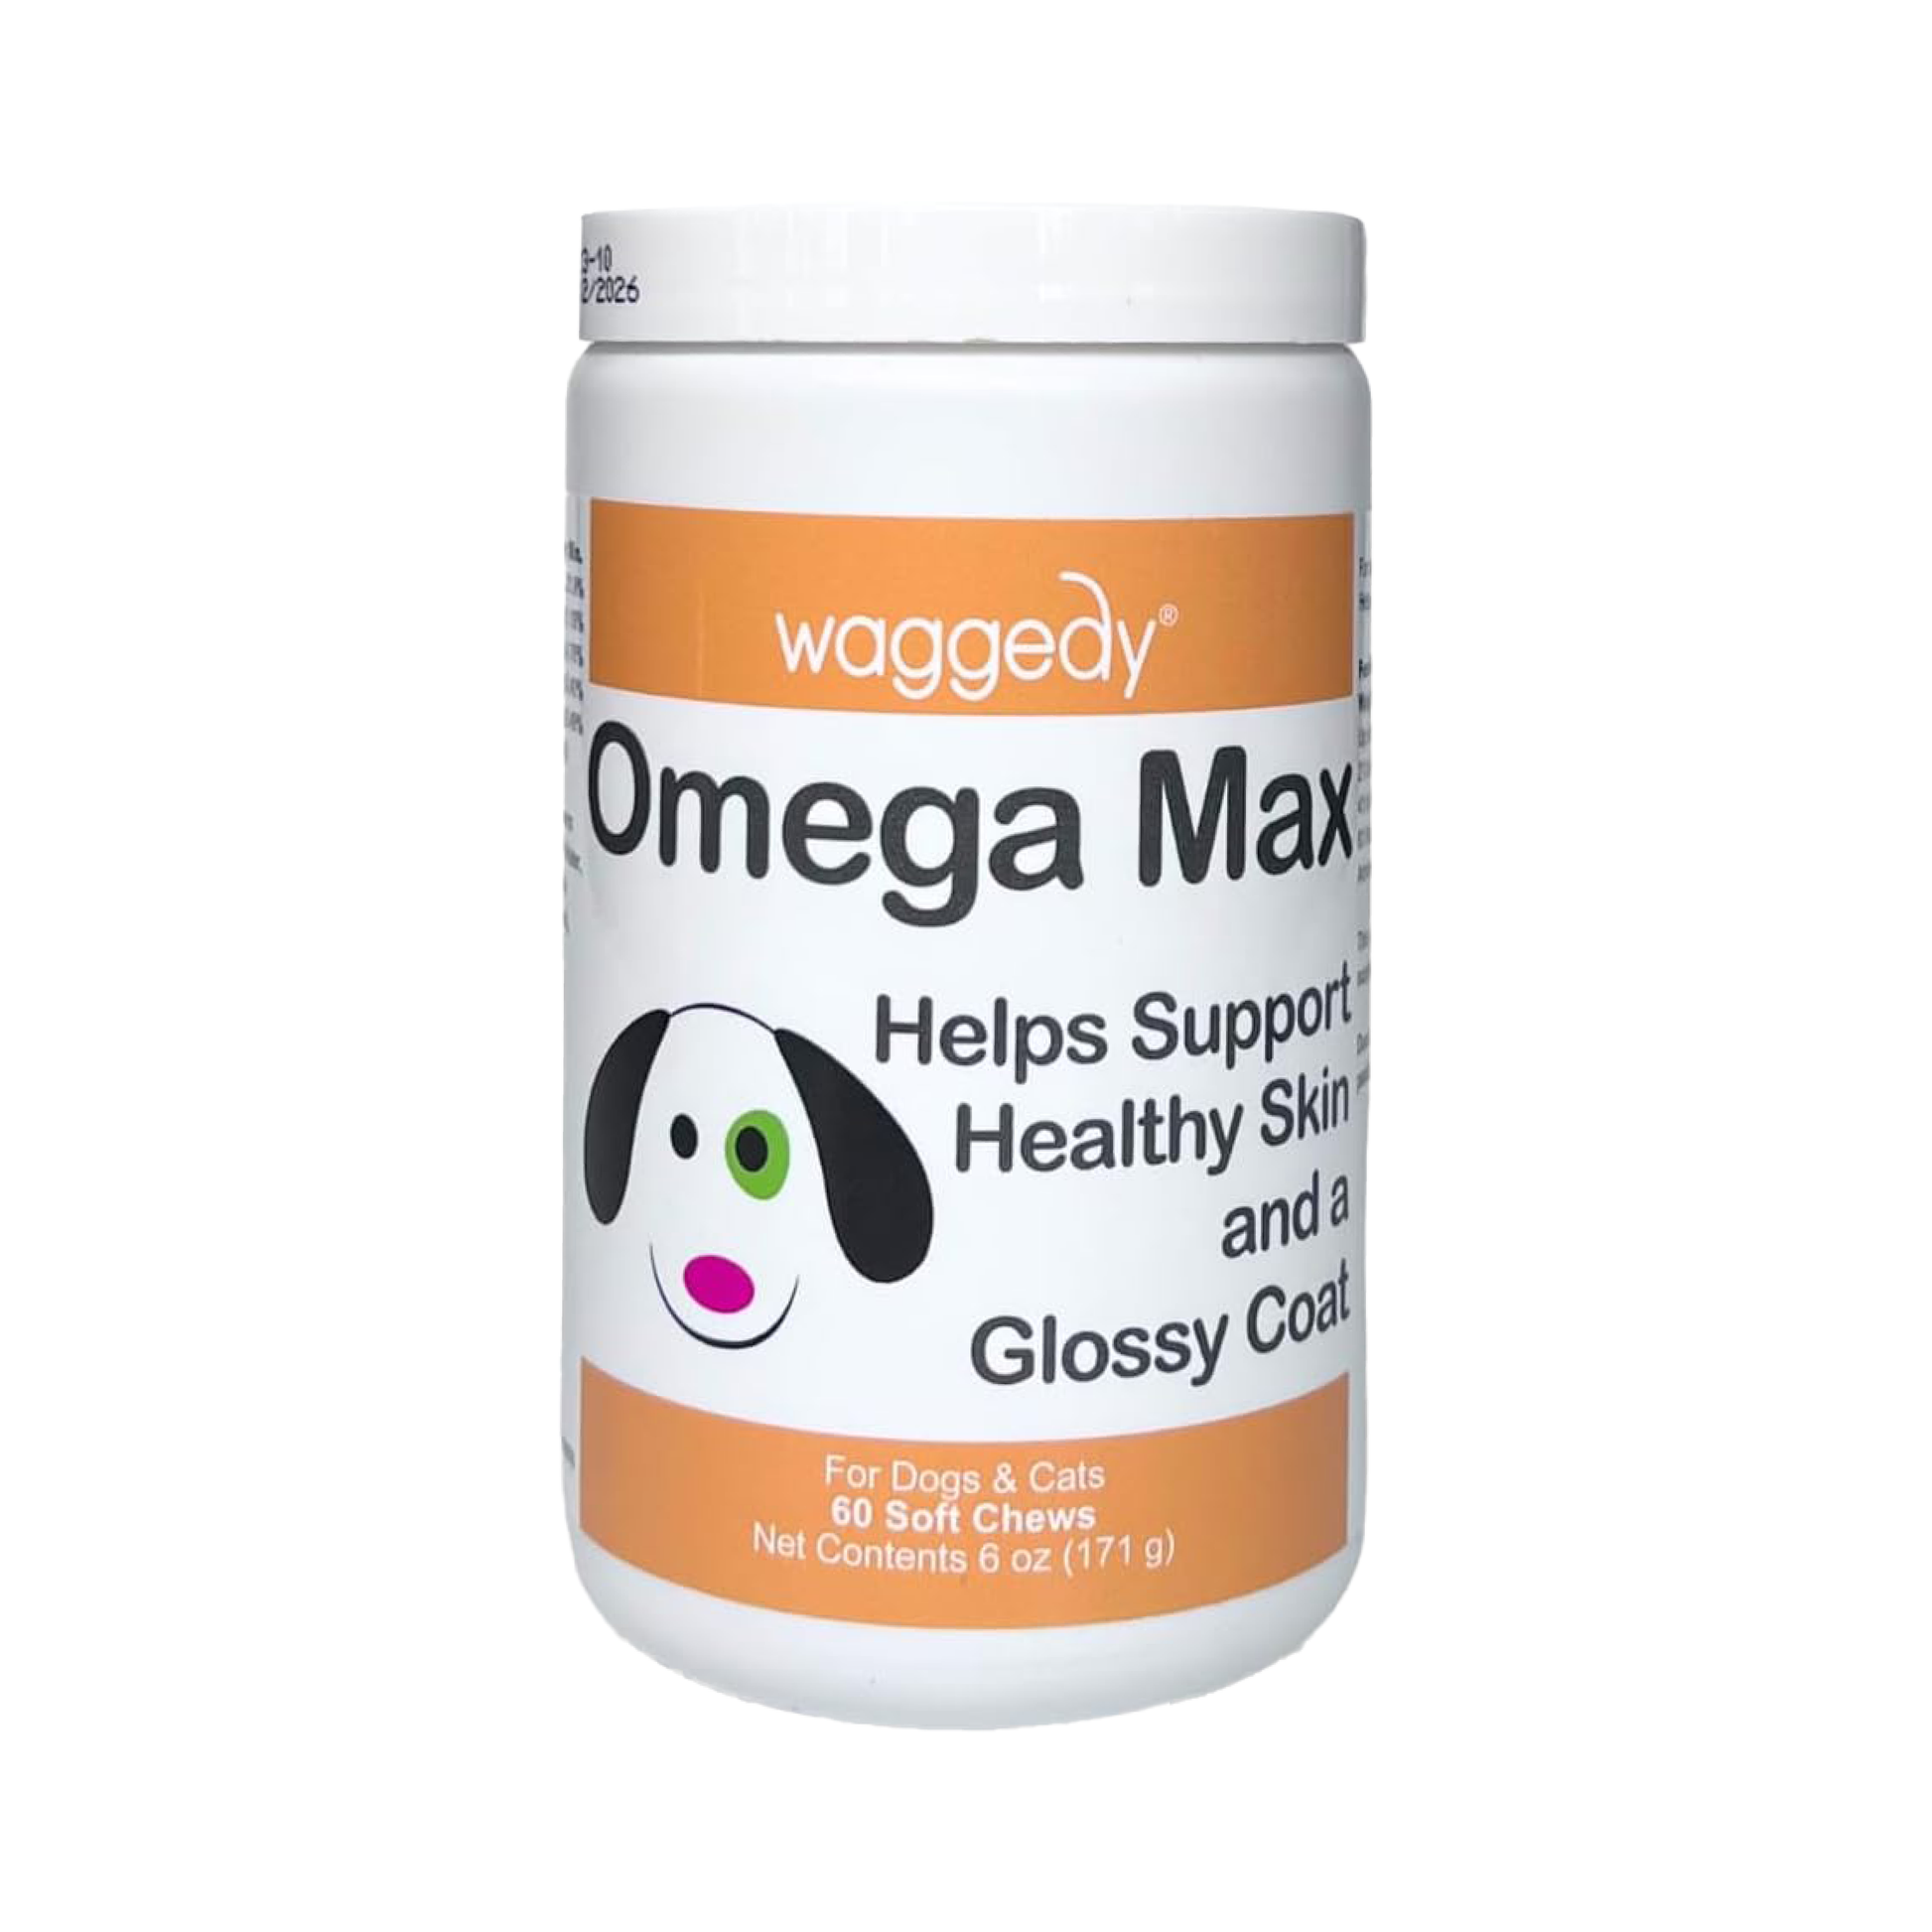 Omega Max chews for dogs